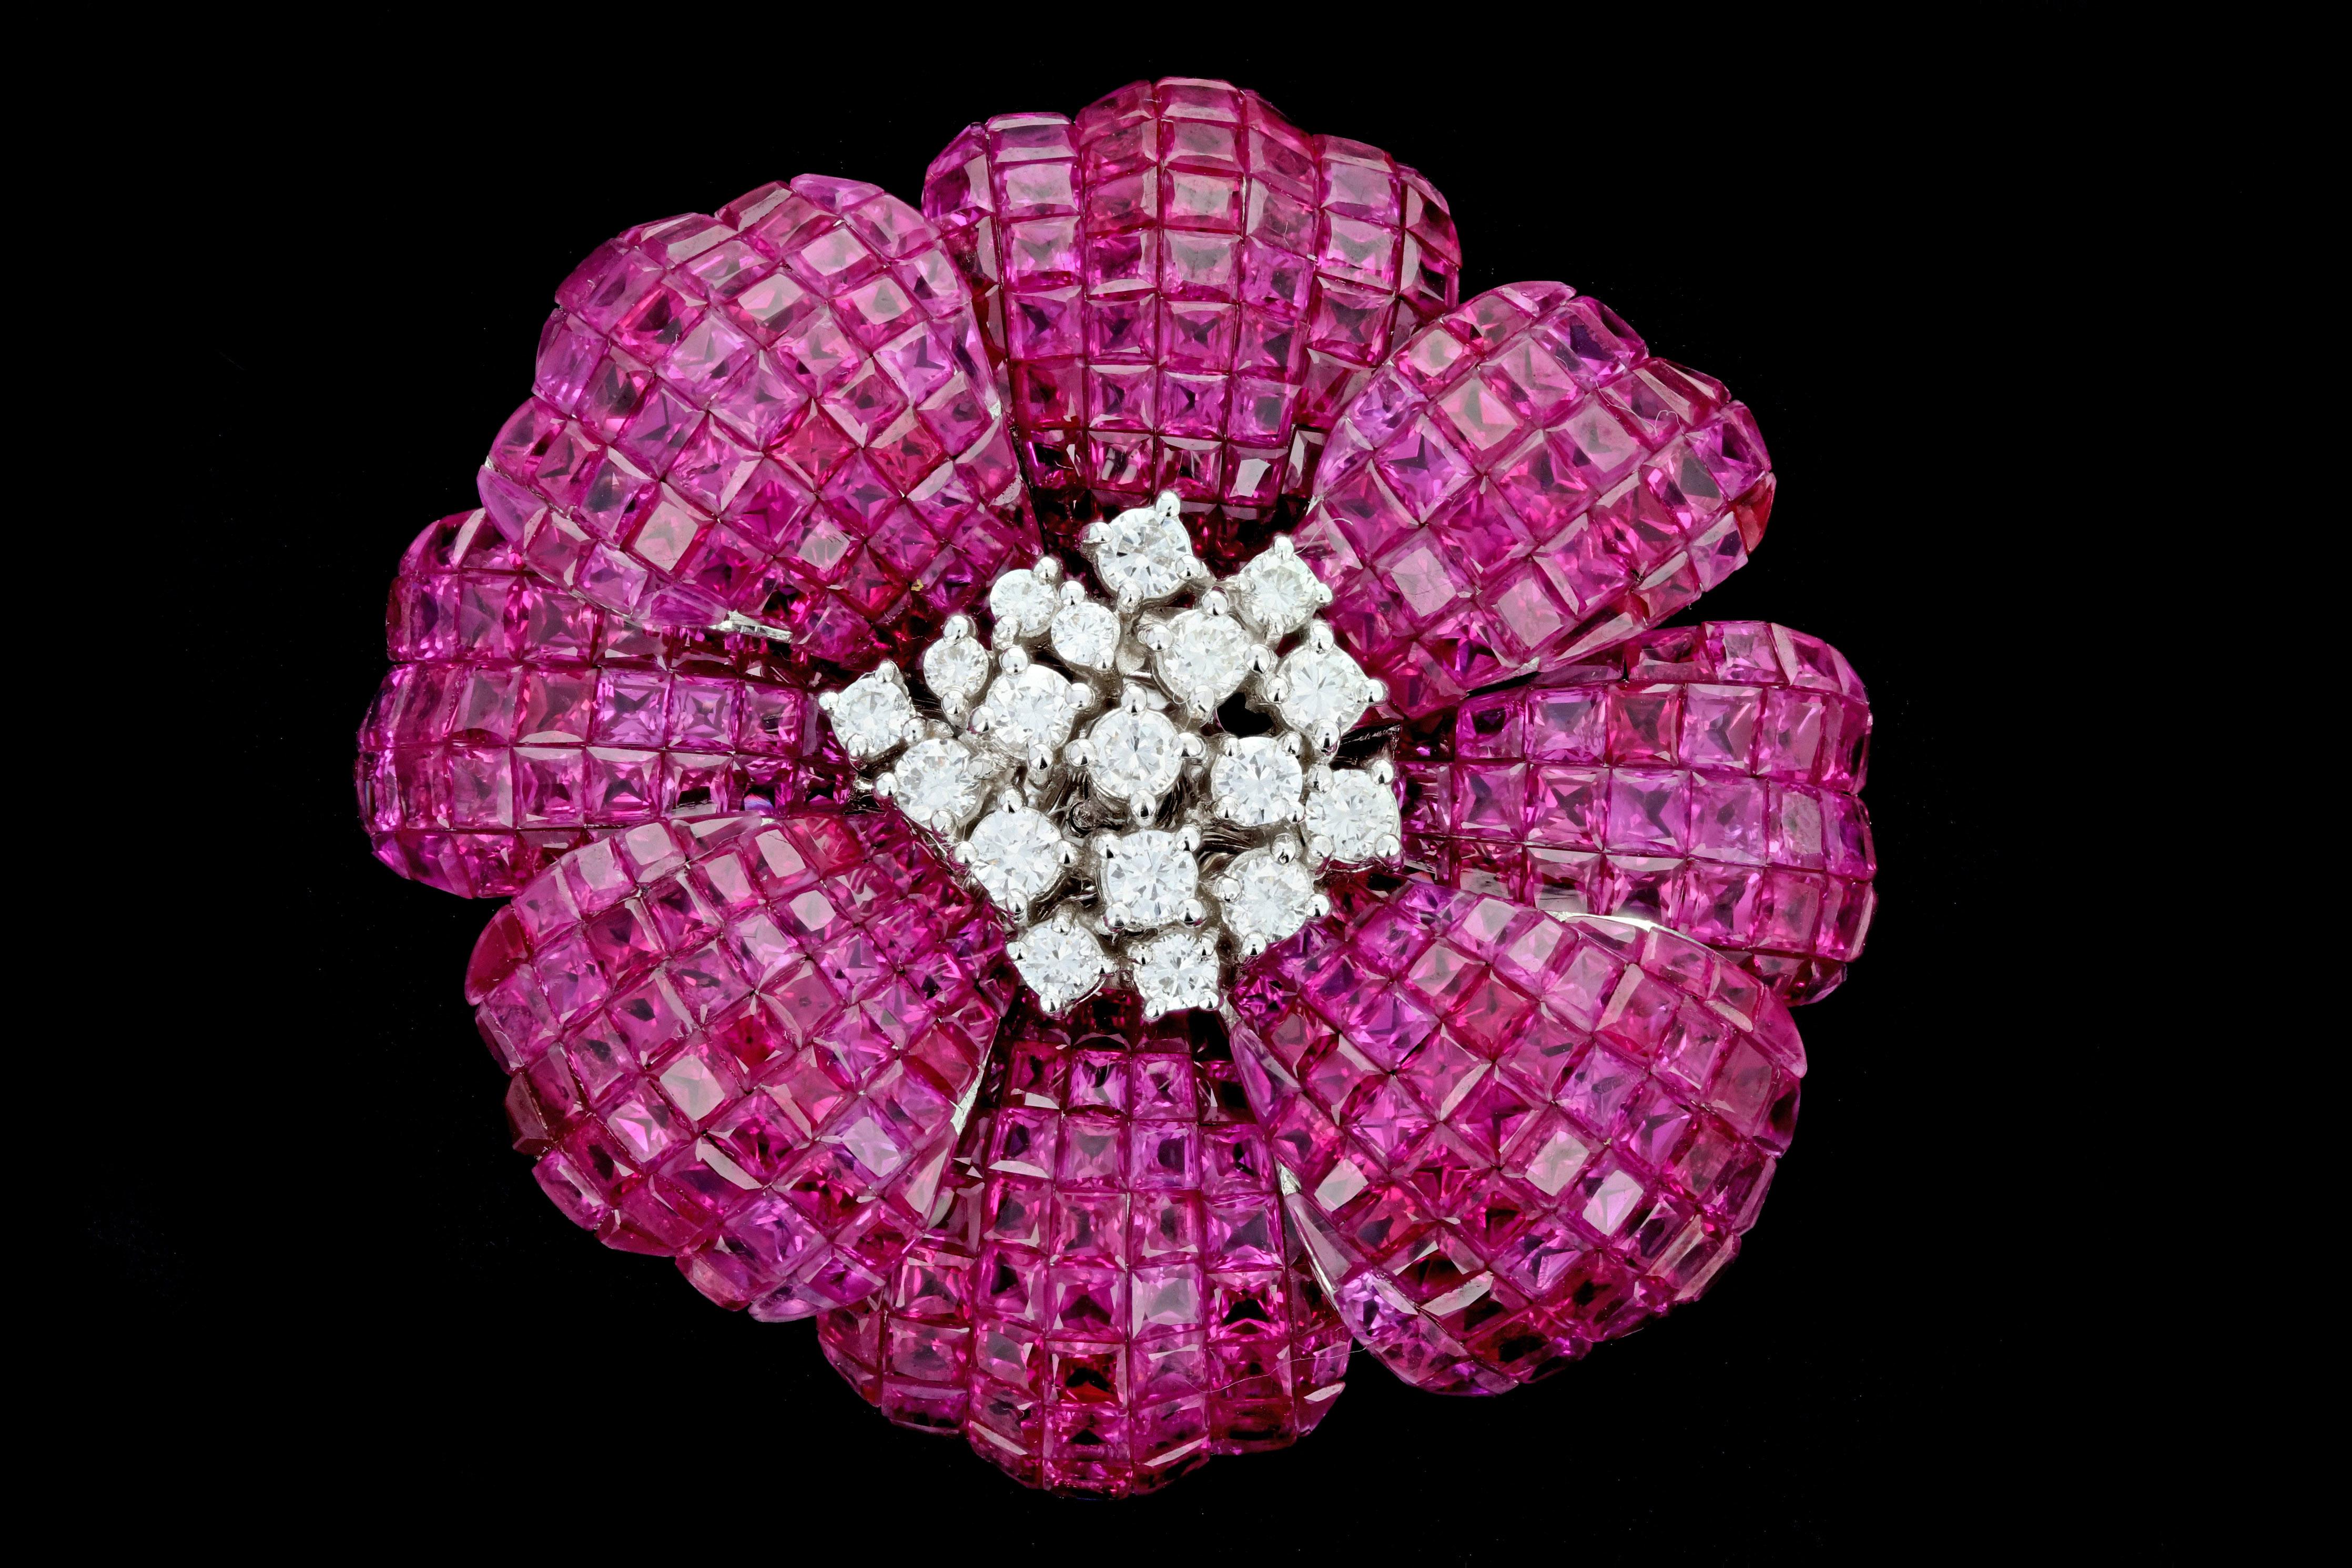 Era: Retro

Composition: 18K White Gold

Primary Stone: Square Step Cut Rubies

Carat Weight: 25 Carats

Accent Stone: Round Brilliant Cut Diamonds

Carat Weight: 1 Carat

Color: G-H

Clarity: VS1/2

Total Carat Weight: 26 Carats

Brooch Weight: